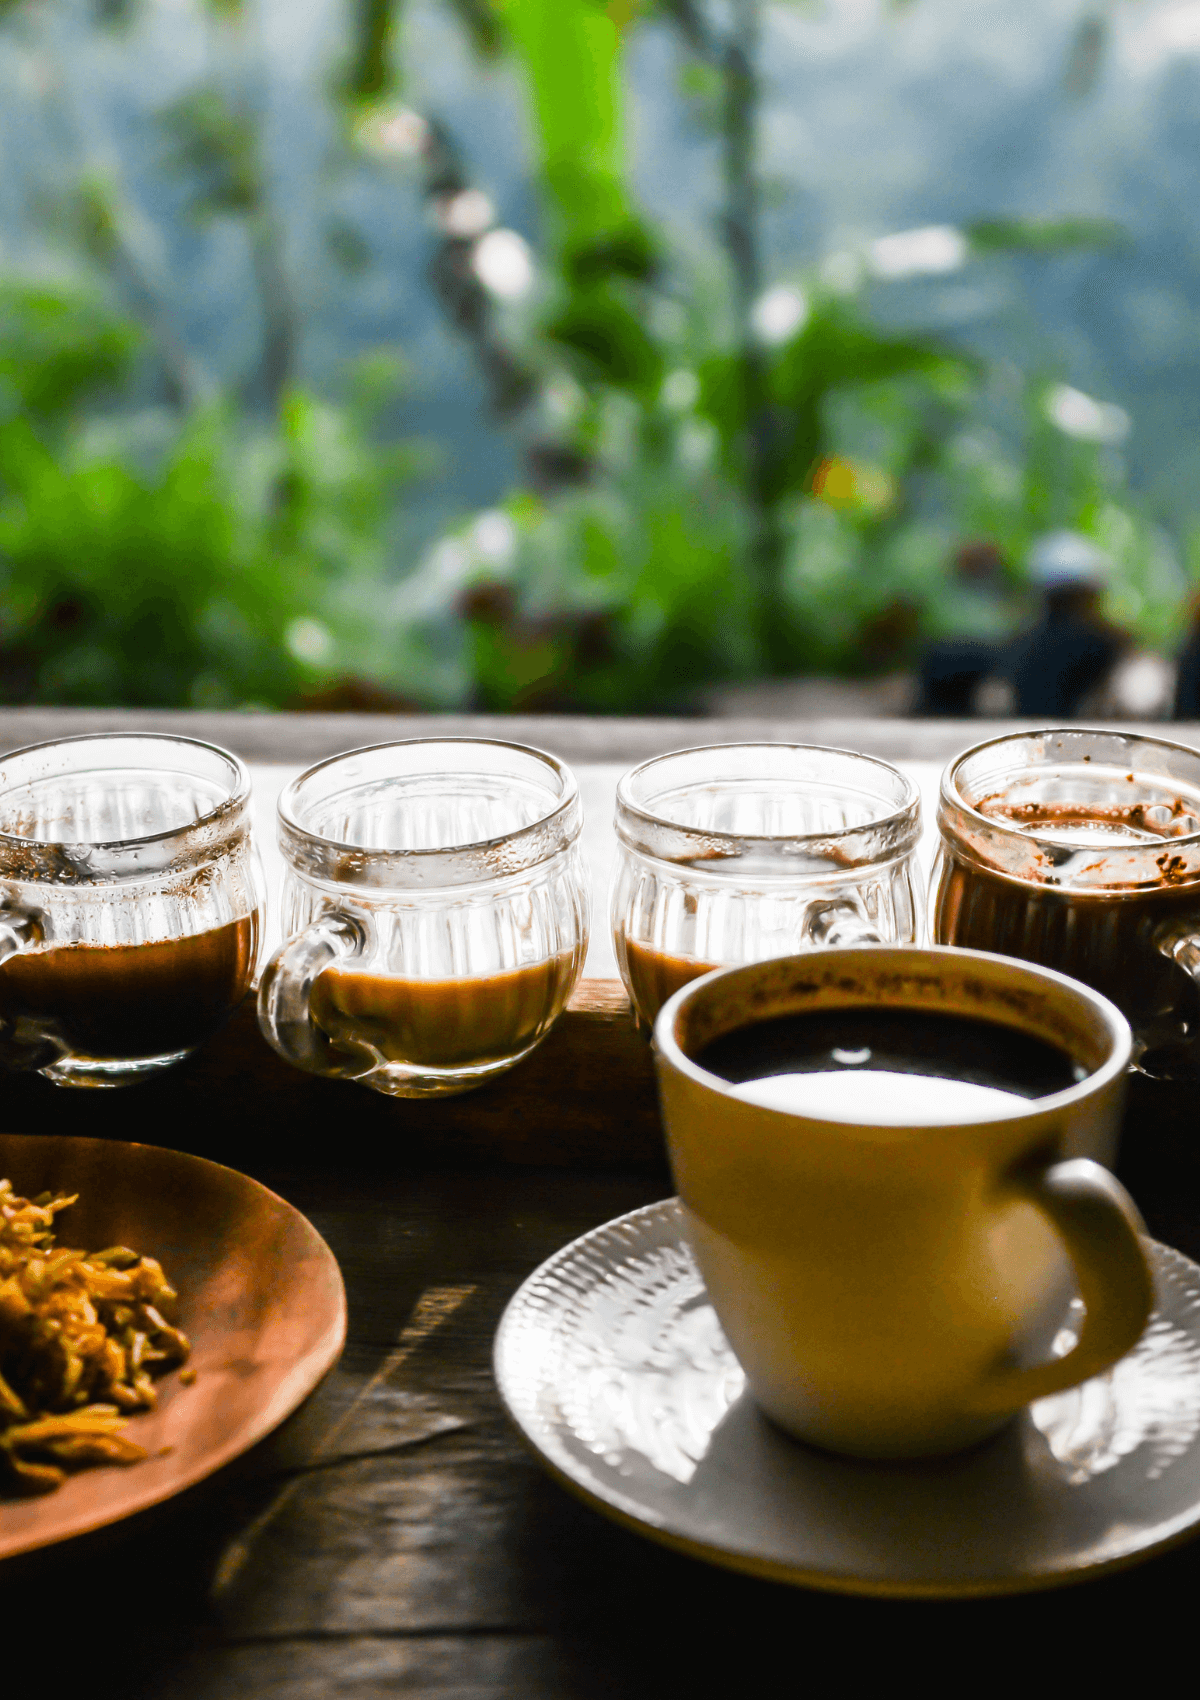 Kopi Luwak coffee is a top souvenir from Indonesia